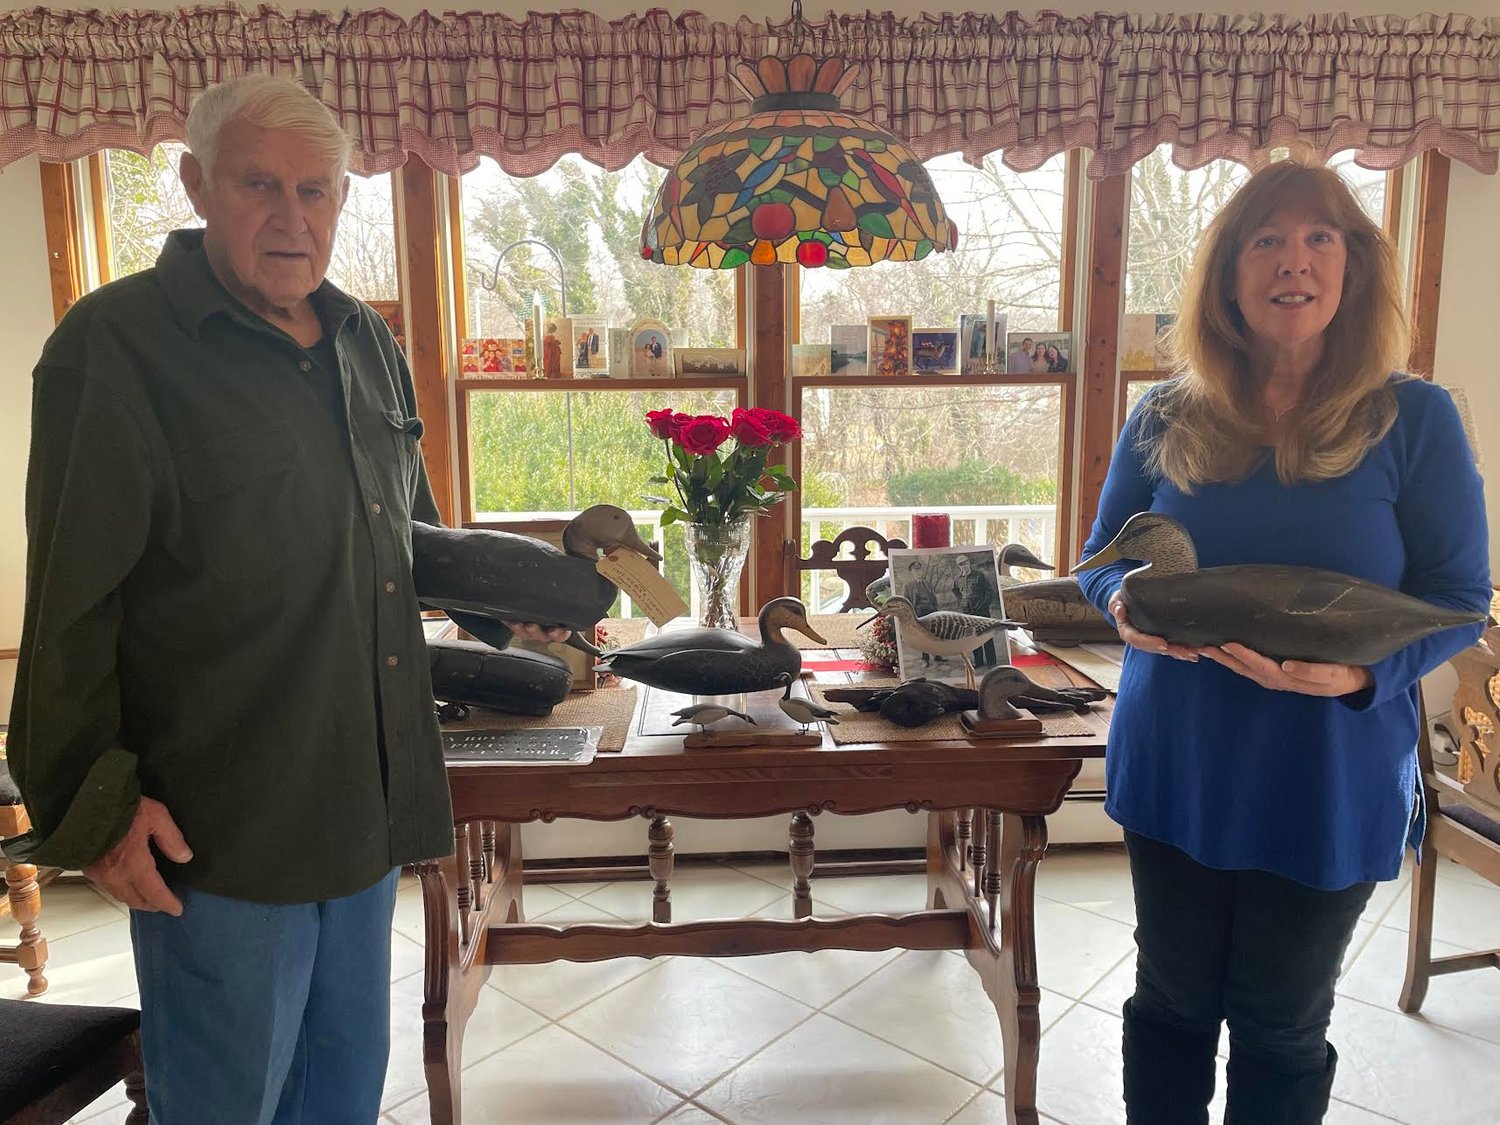 LIDCA past president Dick Richardson and Paul Bigelow’s granddaughter, Denise Valenti, stand in front of decoys, including some from her great-grandfather and grandfather, promoting their upcoming shows and anniversary.